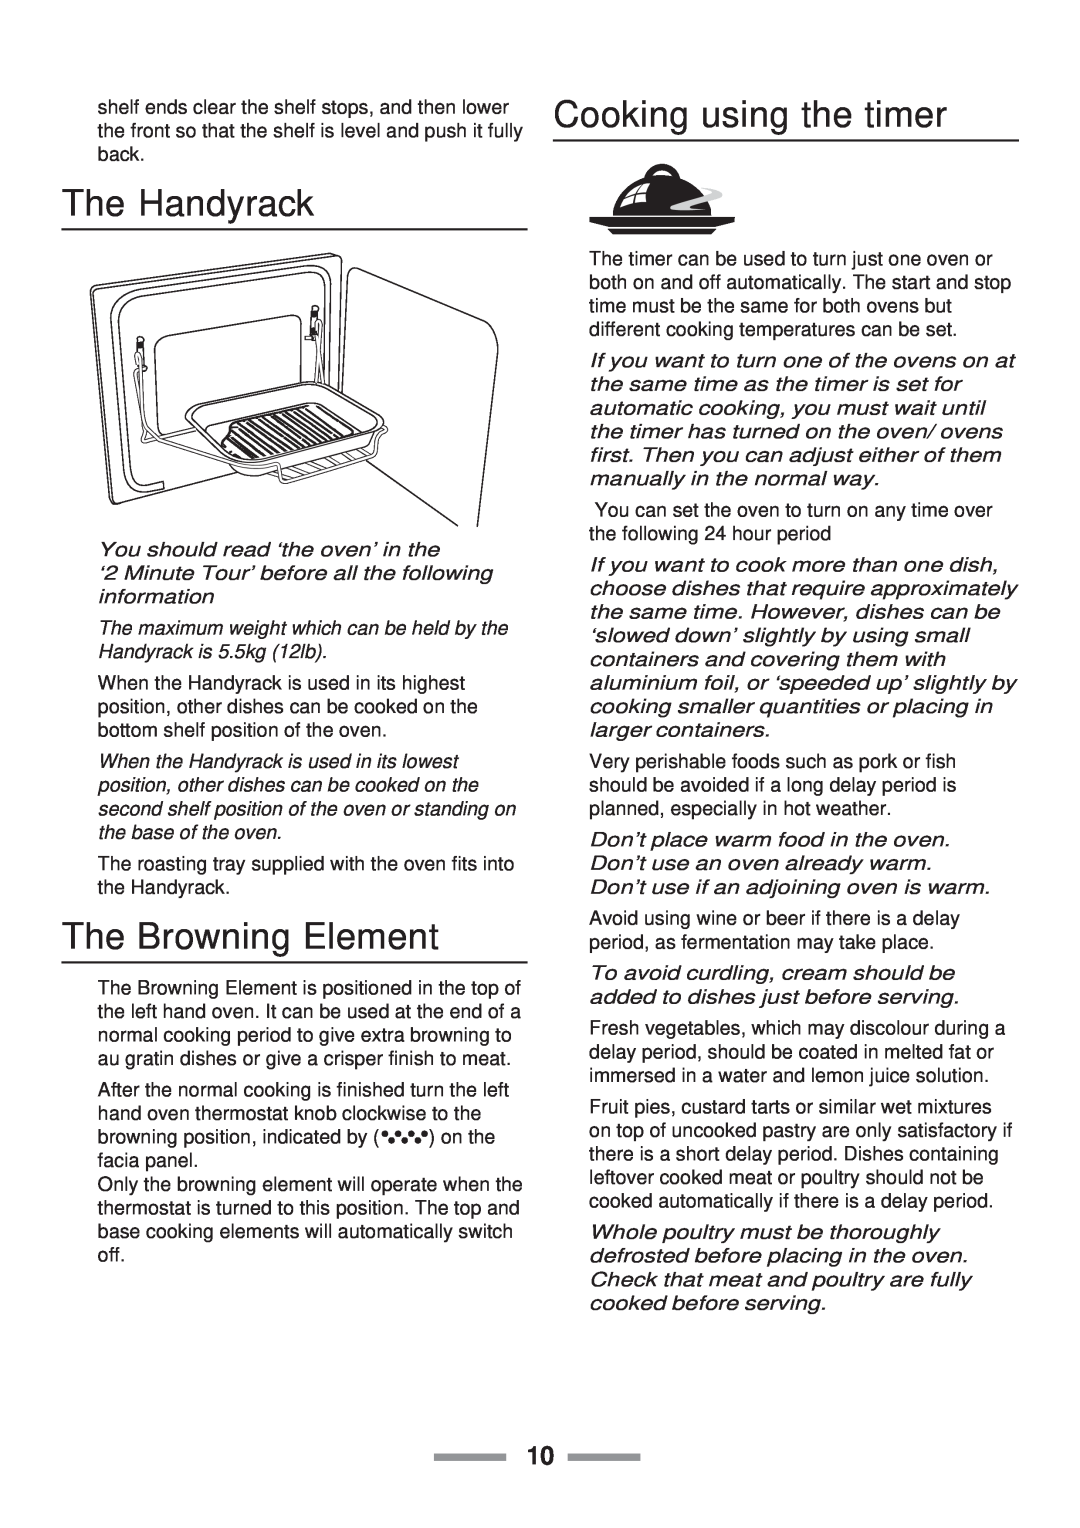 Rangemaster 110 installation instructions Cooking using the timer, The Handyrack, The Browning Element 